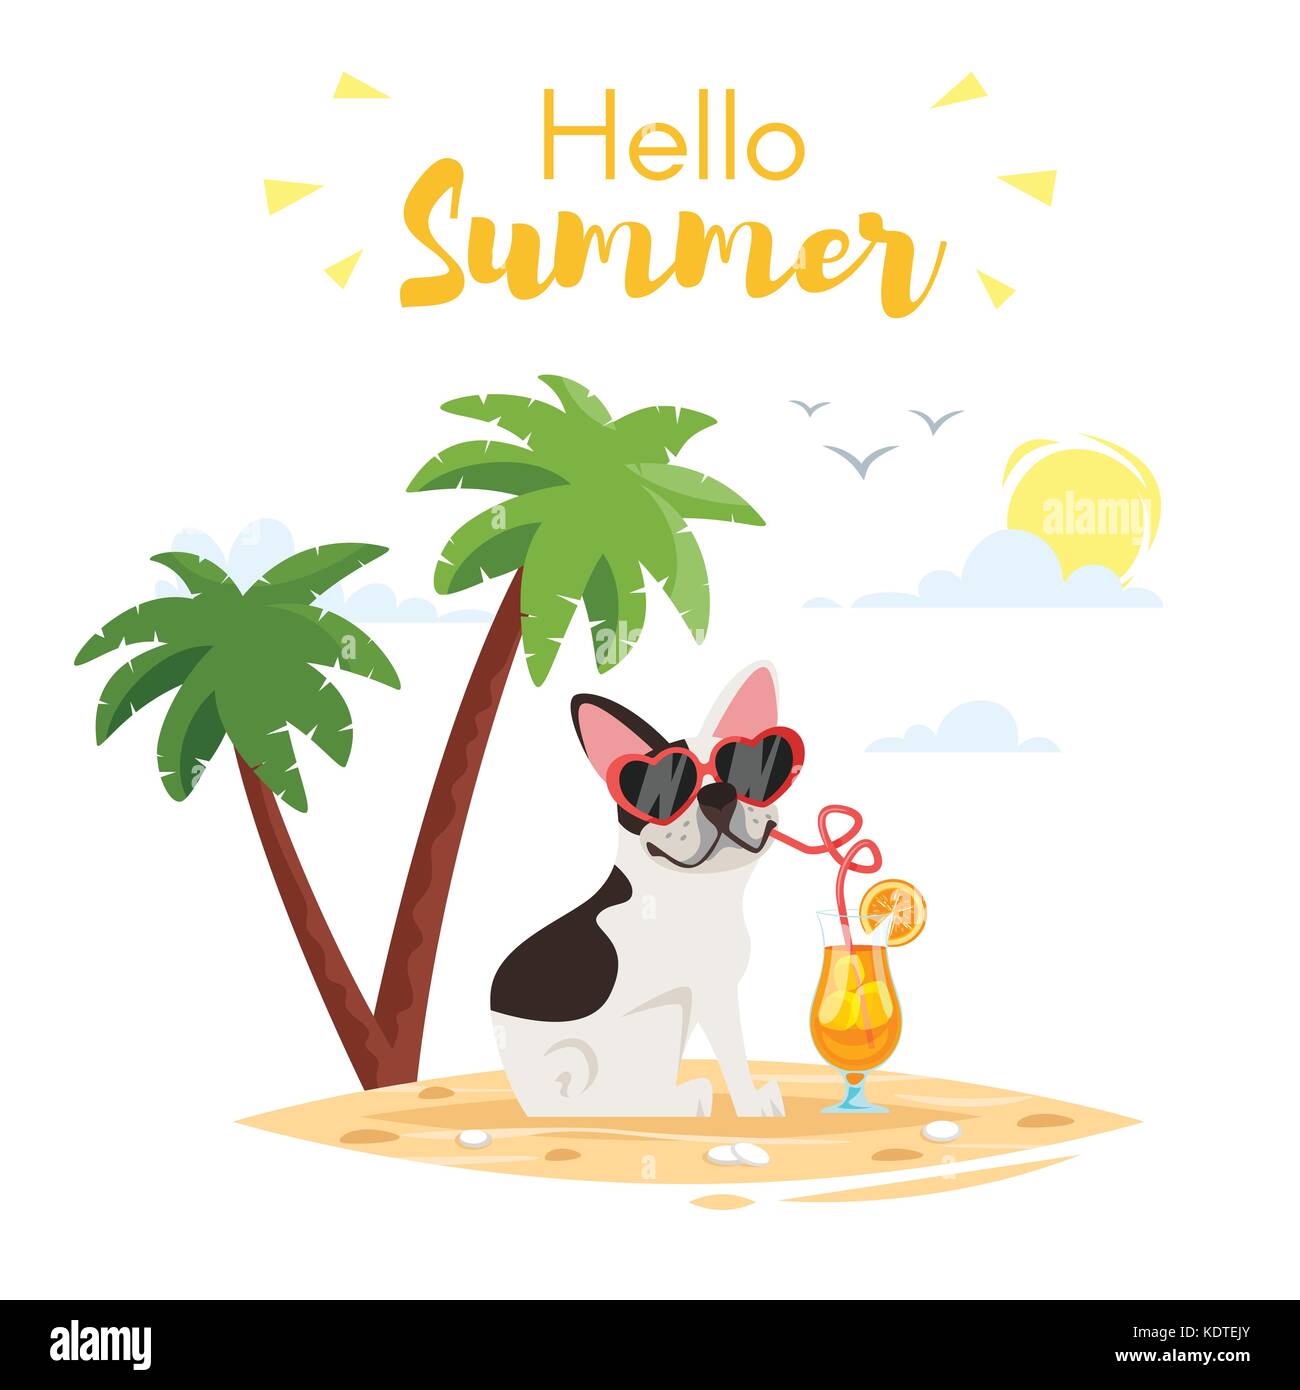 Vector cartoon style illustration of bulldog on an island with palm trees. Isolated on white background. Template for print. Title 'Hello summer'. Stock Vector